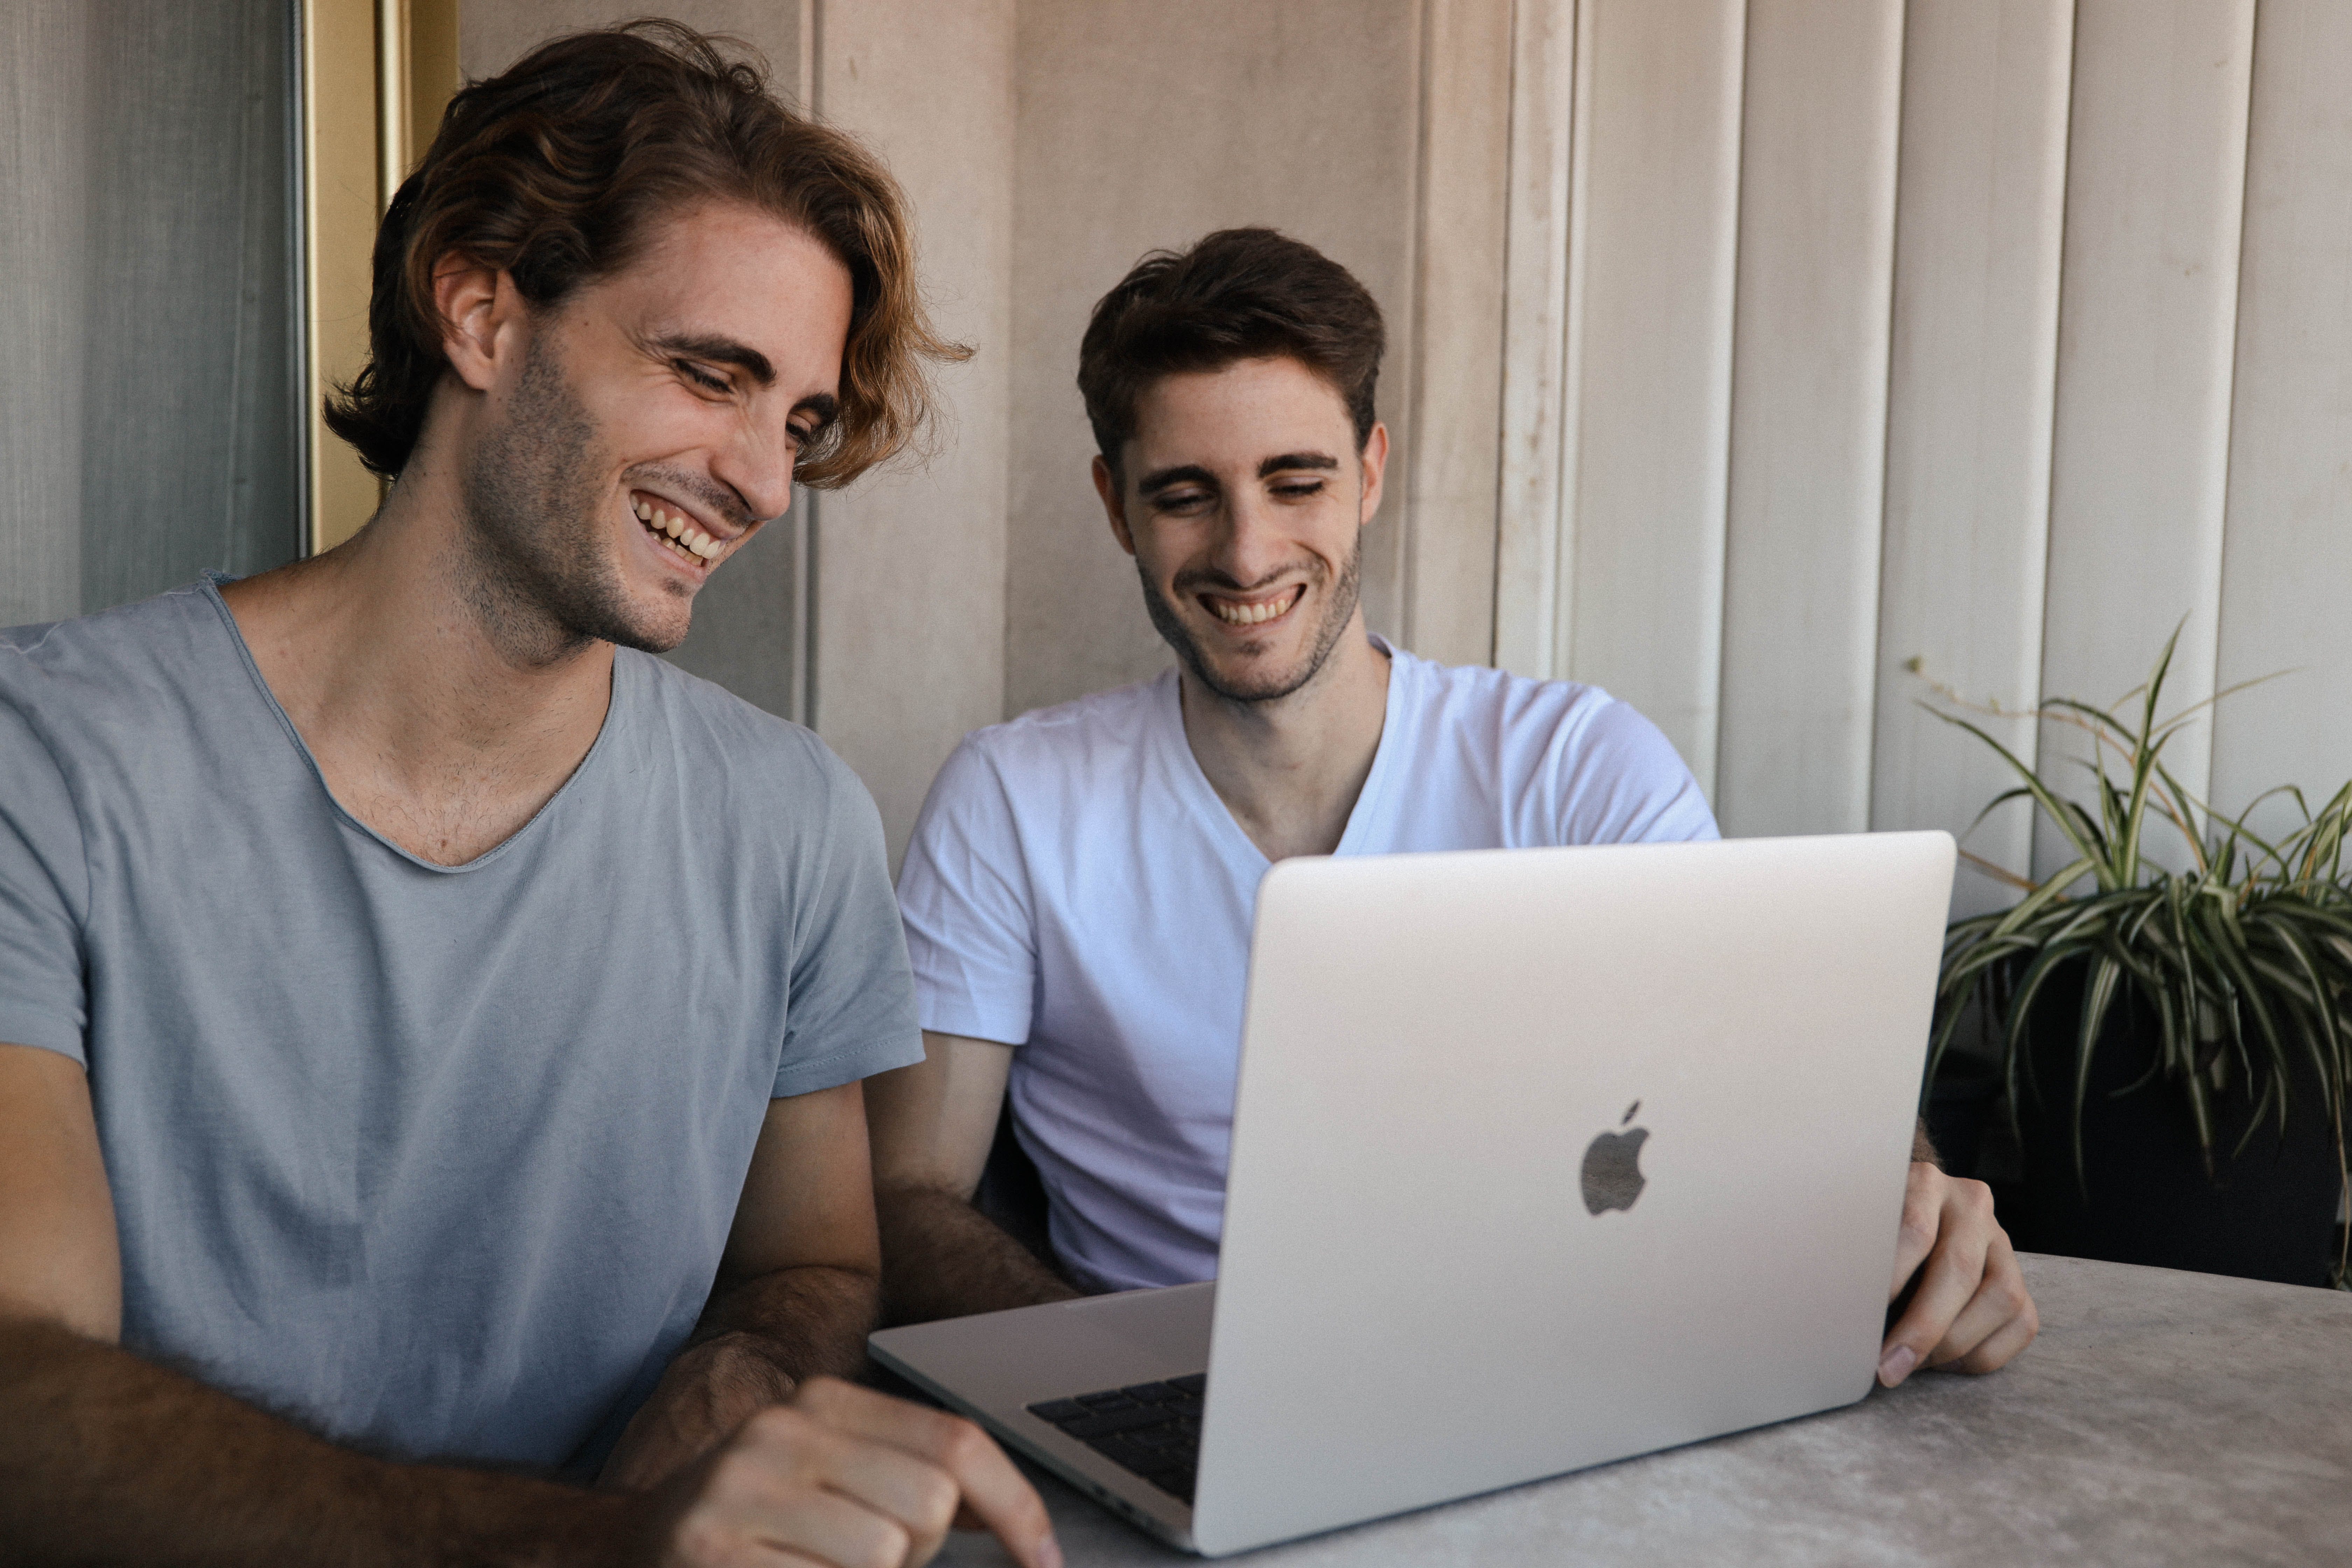 Two young men laughing while using a laptop | Source: Pexels